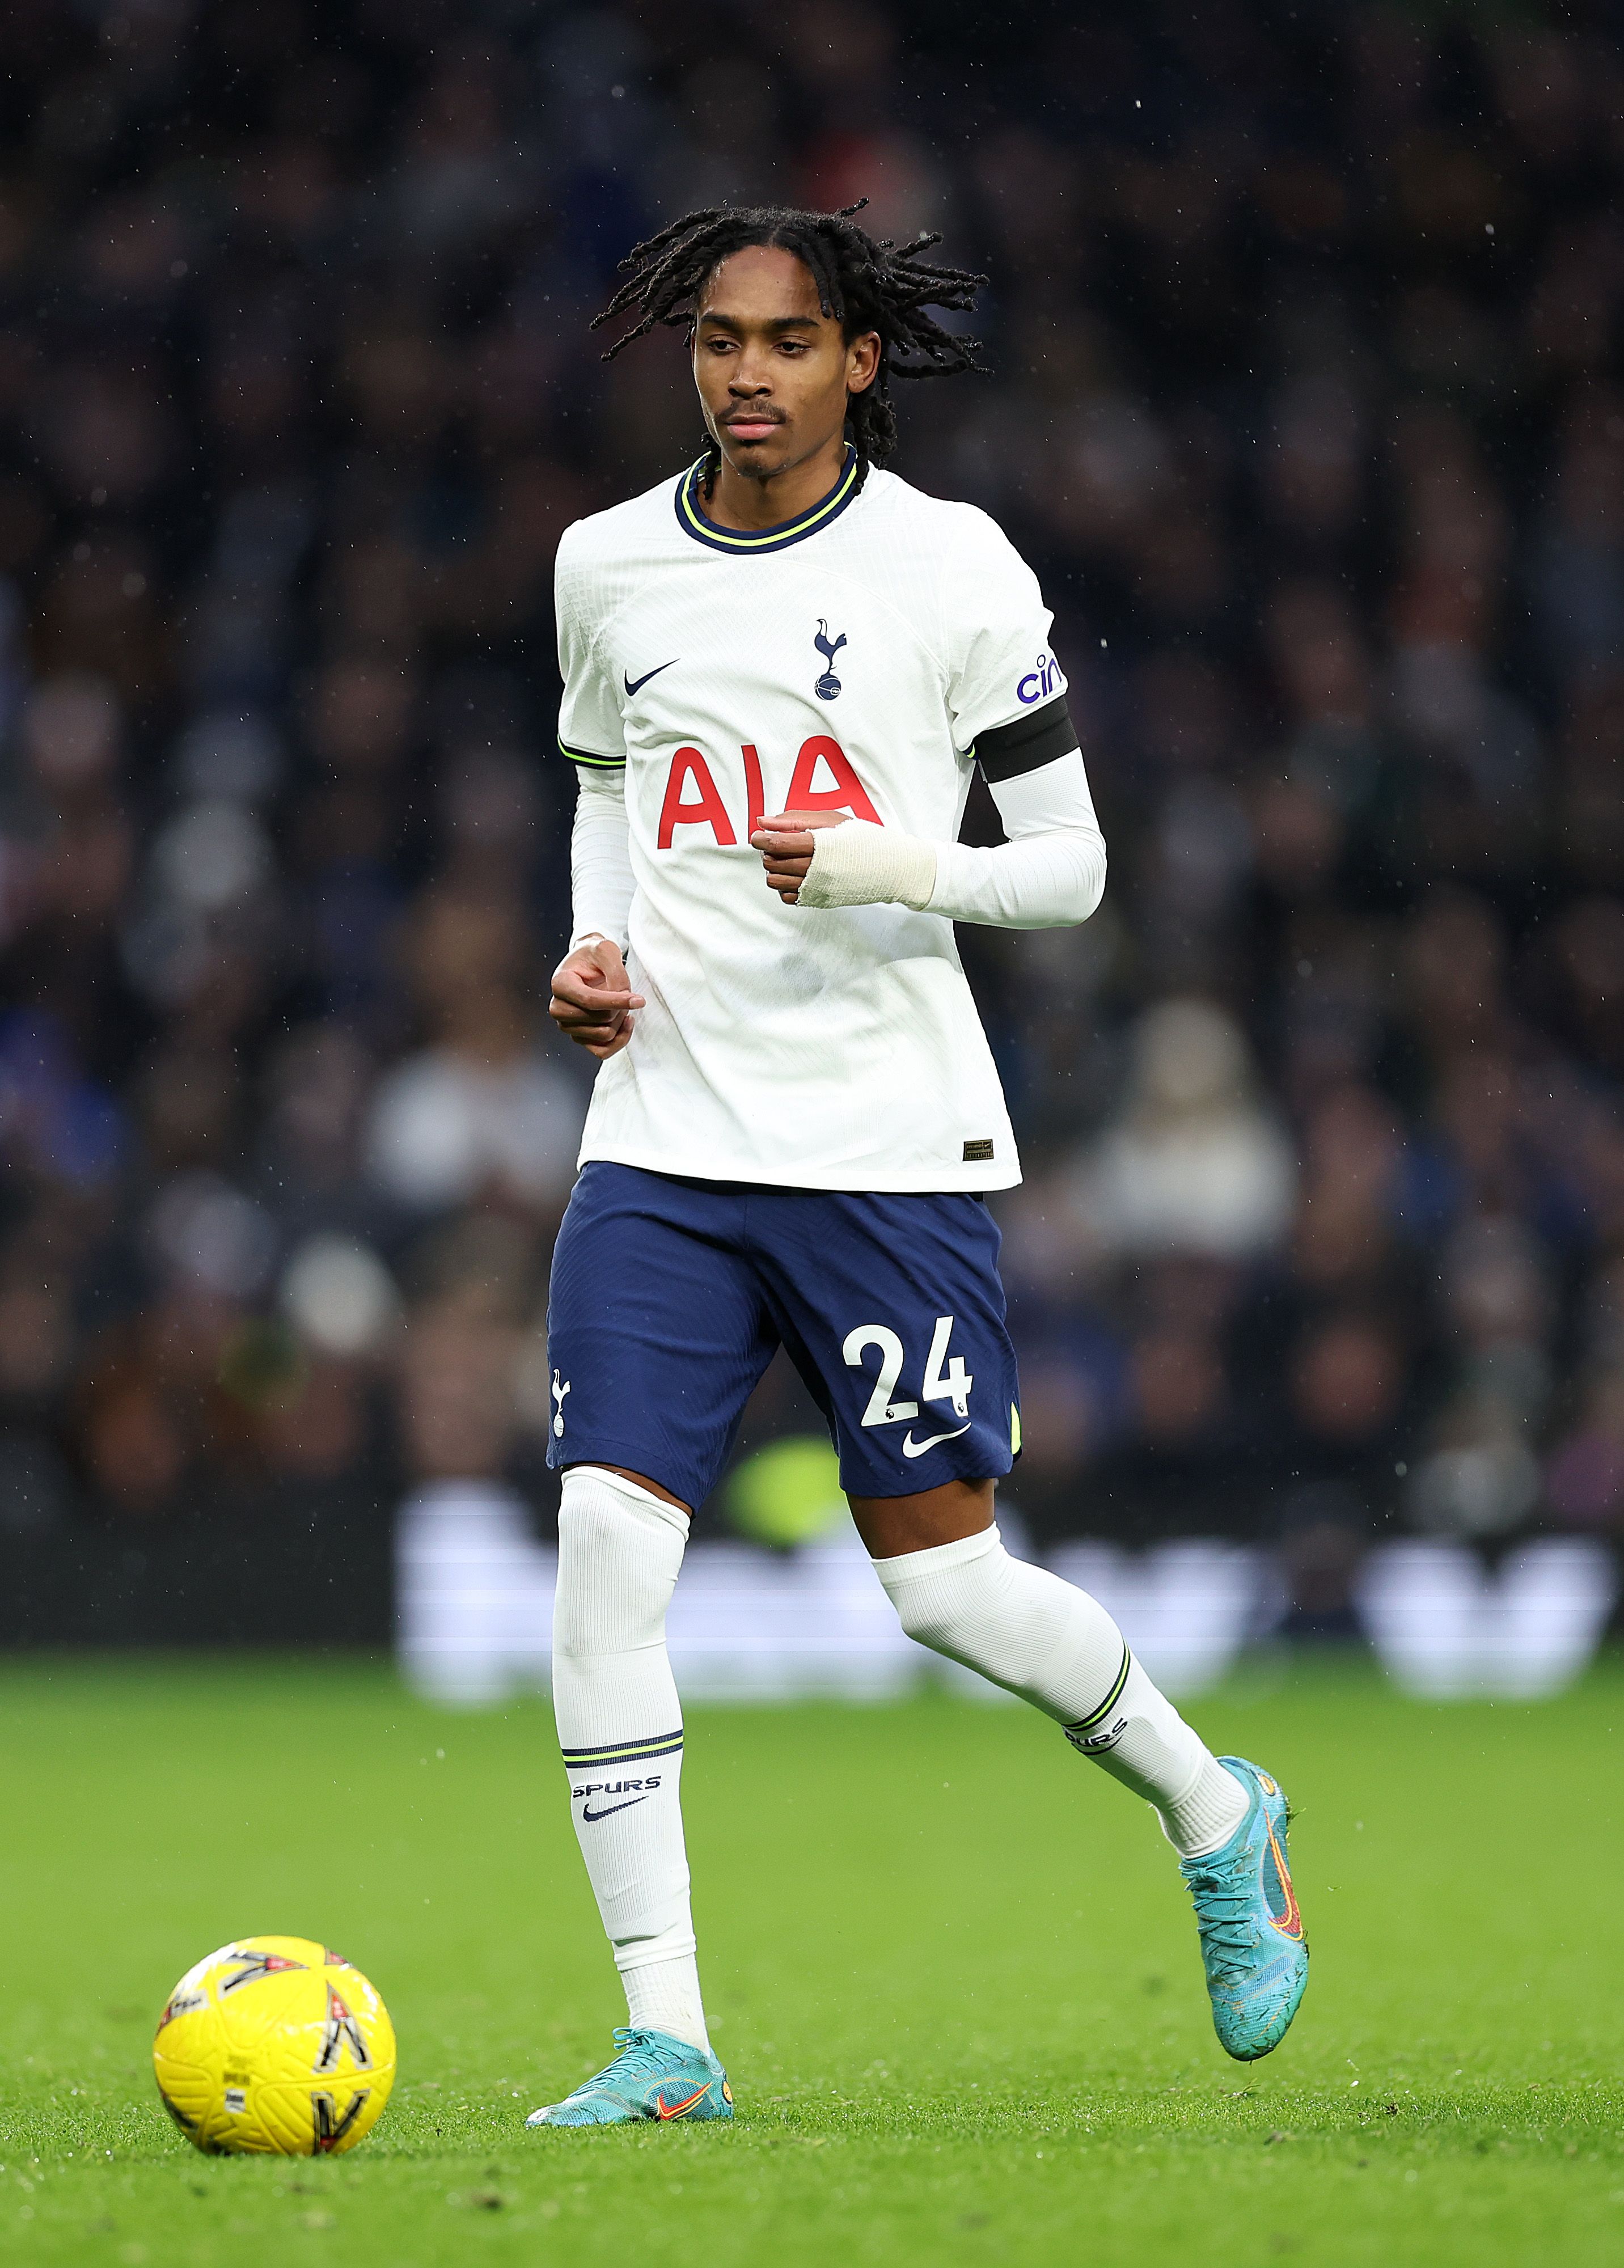 Spence appears for Spurs in the FA Cup.